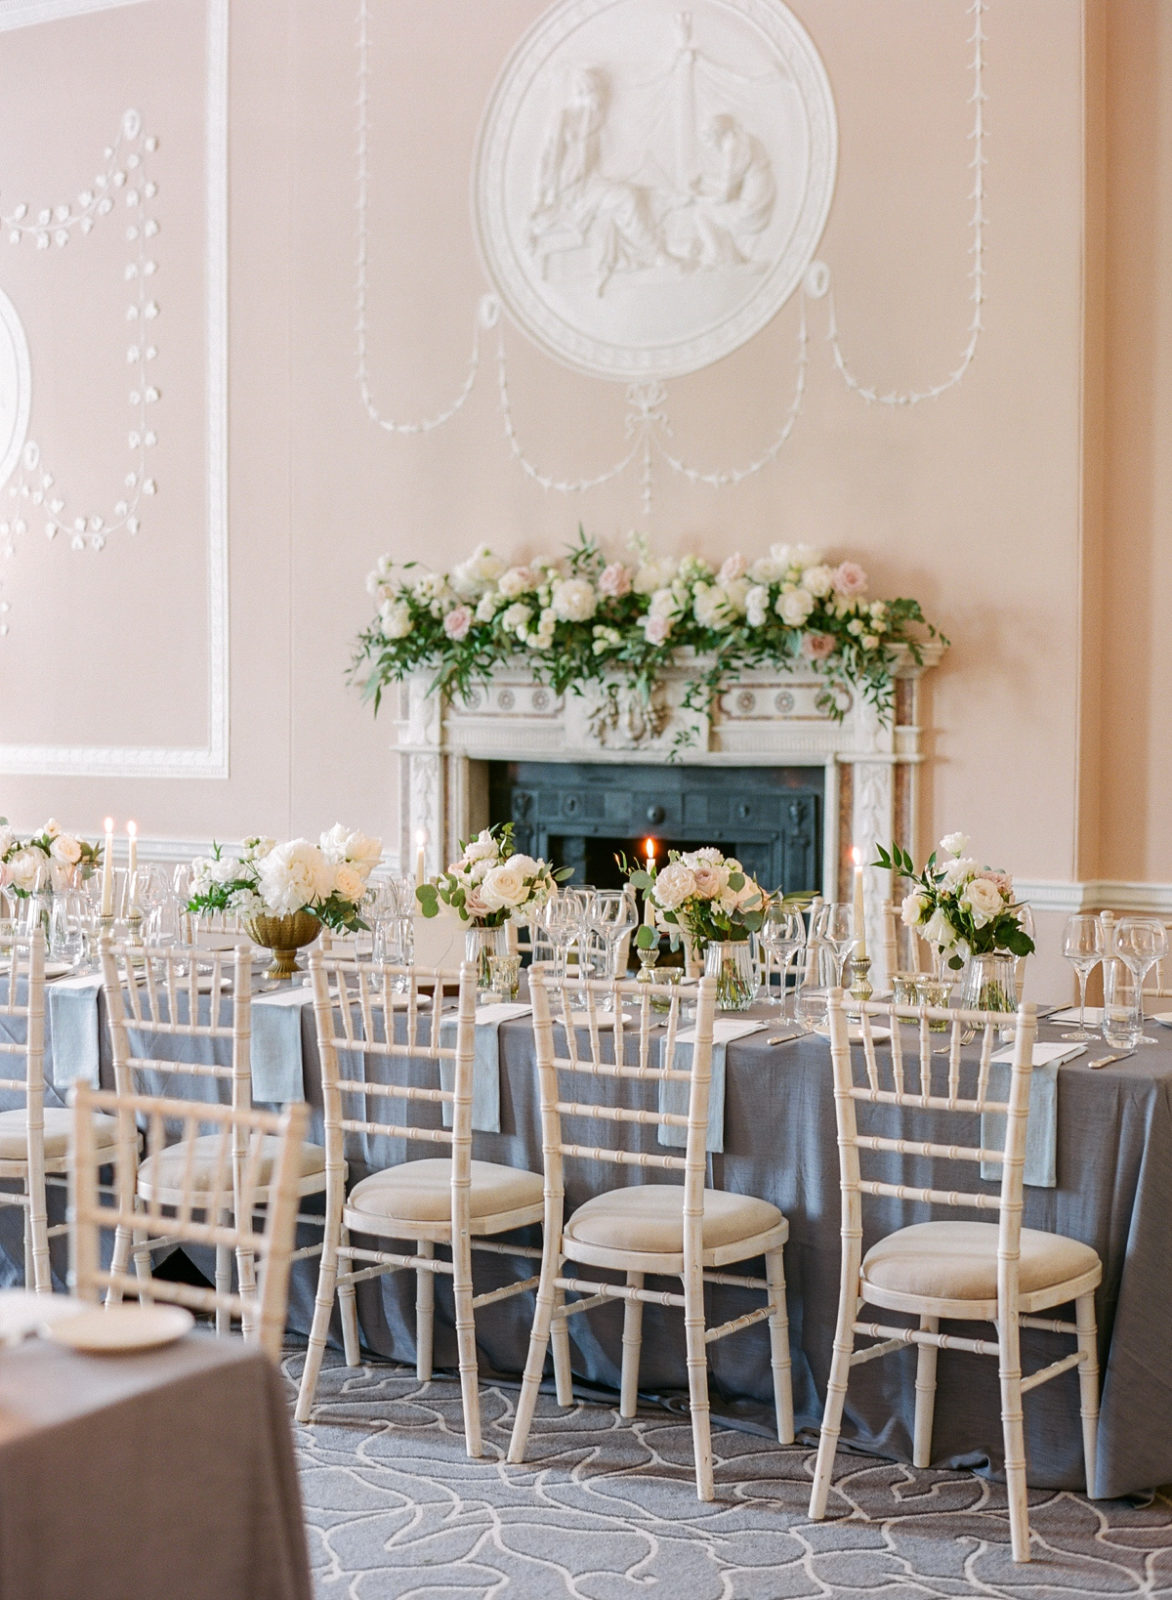 Ireland Film Photographer | Molly Carr Photography | Mount Juliet Estate Lady Helen Dining Room Wedding Reception with White Wedding Flowers and Candles